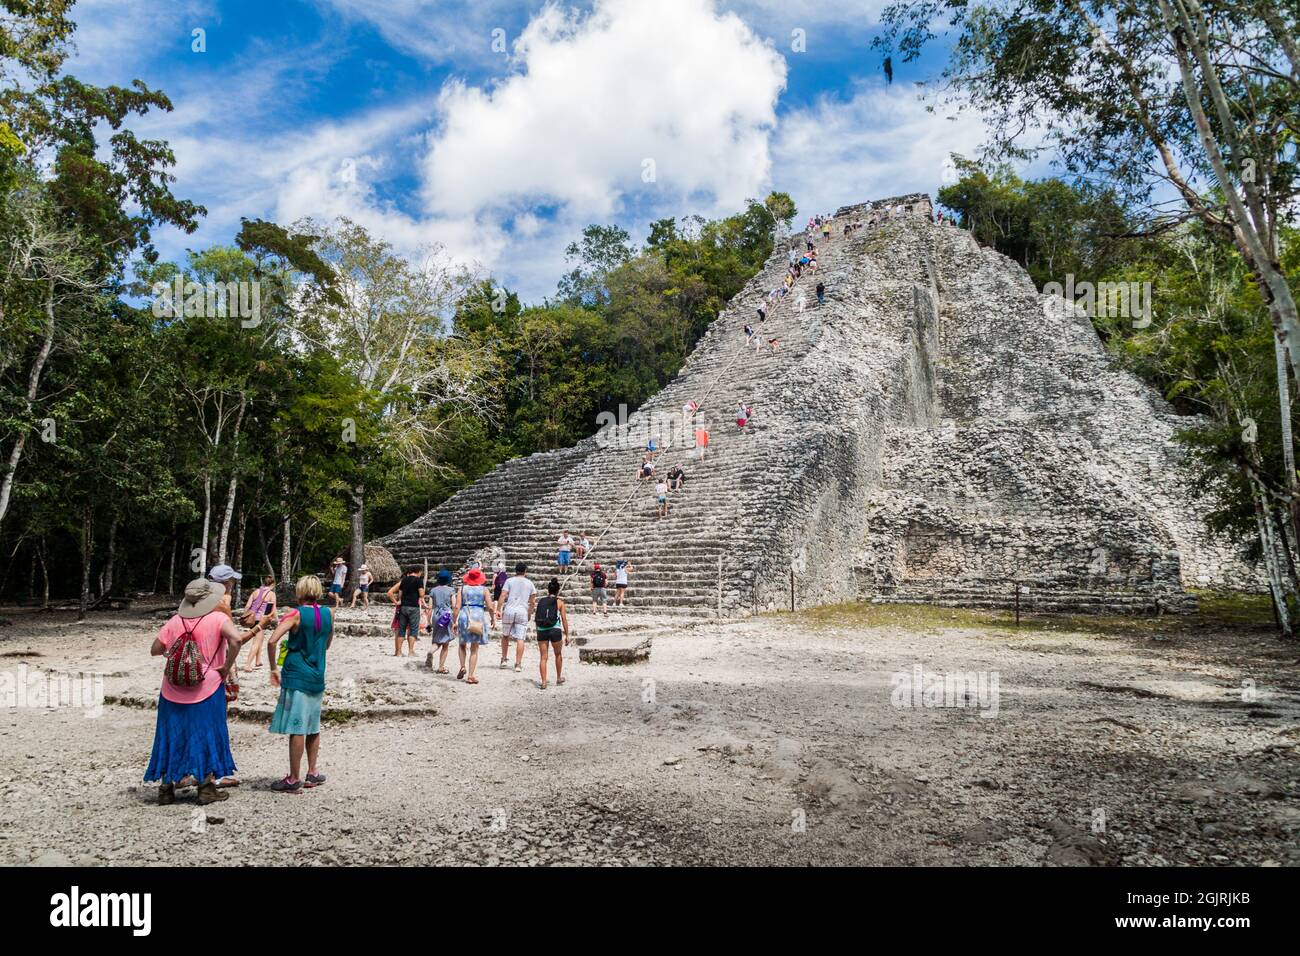 COBA, MEXICO - MARCH 1, 2016: Tourist visit the Pyramid Nohoch Mul at the ruins of the Mayan city Coba, Mexico Stock Photo